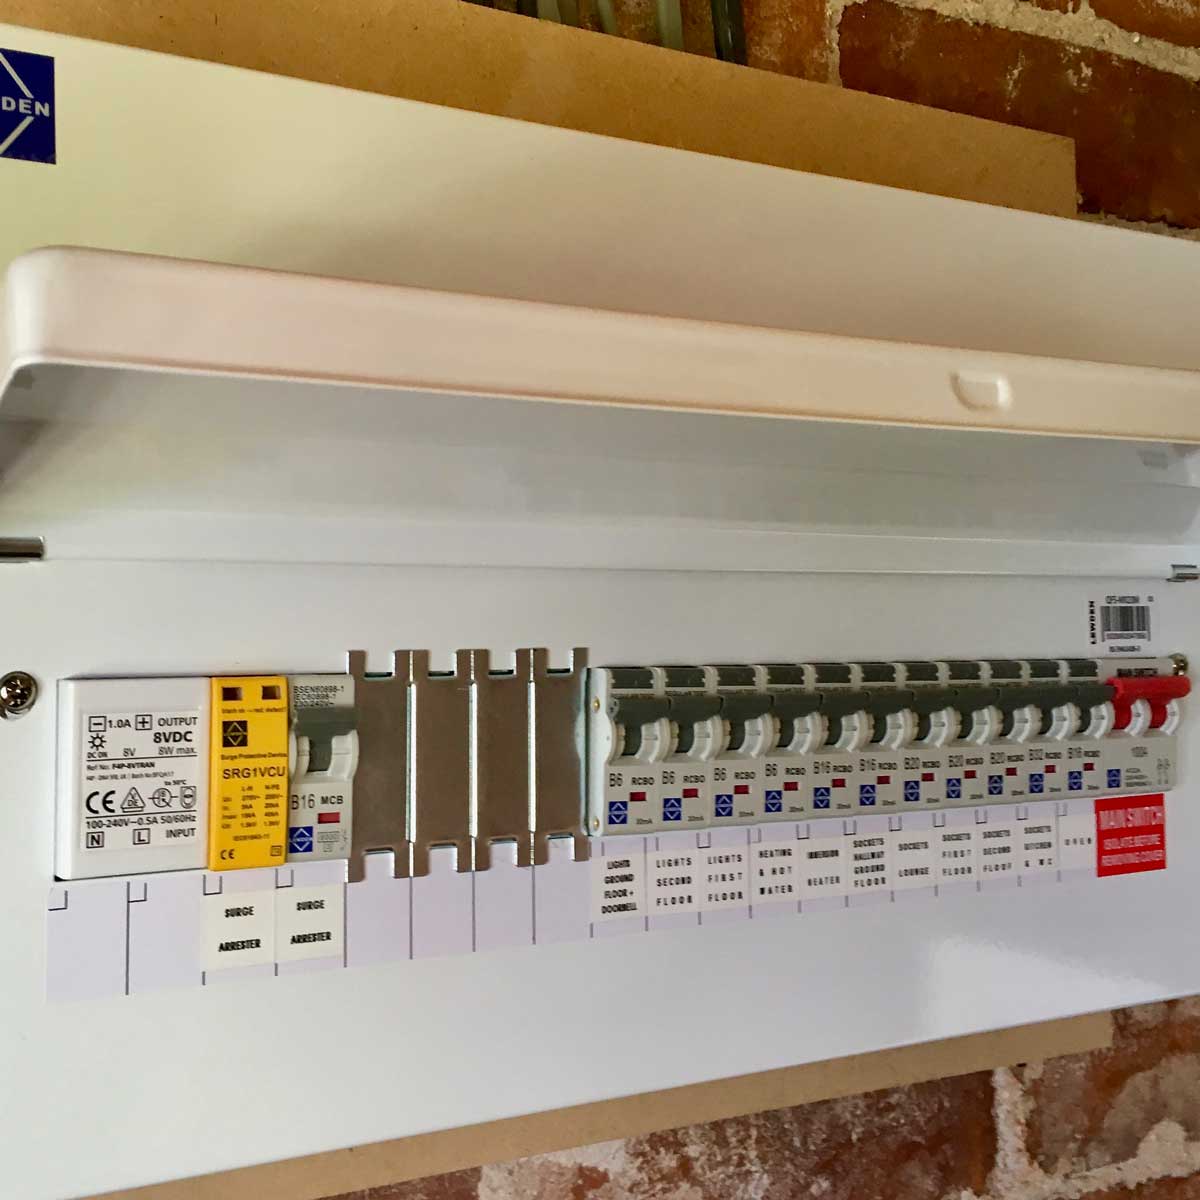 A&#x20;new&#x20;consumer&#x20;unit&#x20;for&#x20;a&#x20;recently&#x20;renovated&#x20;property&#x20;in&#x20;Exmouth